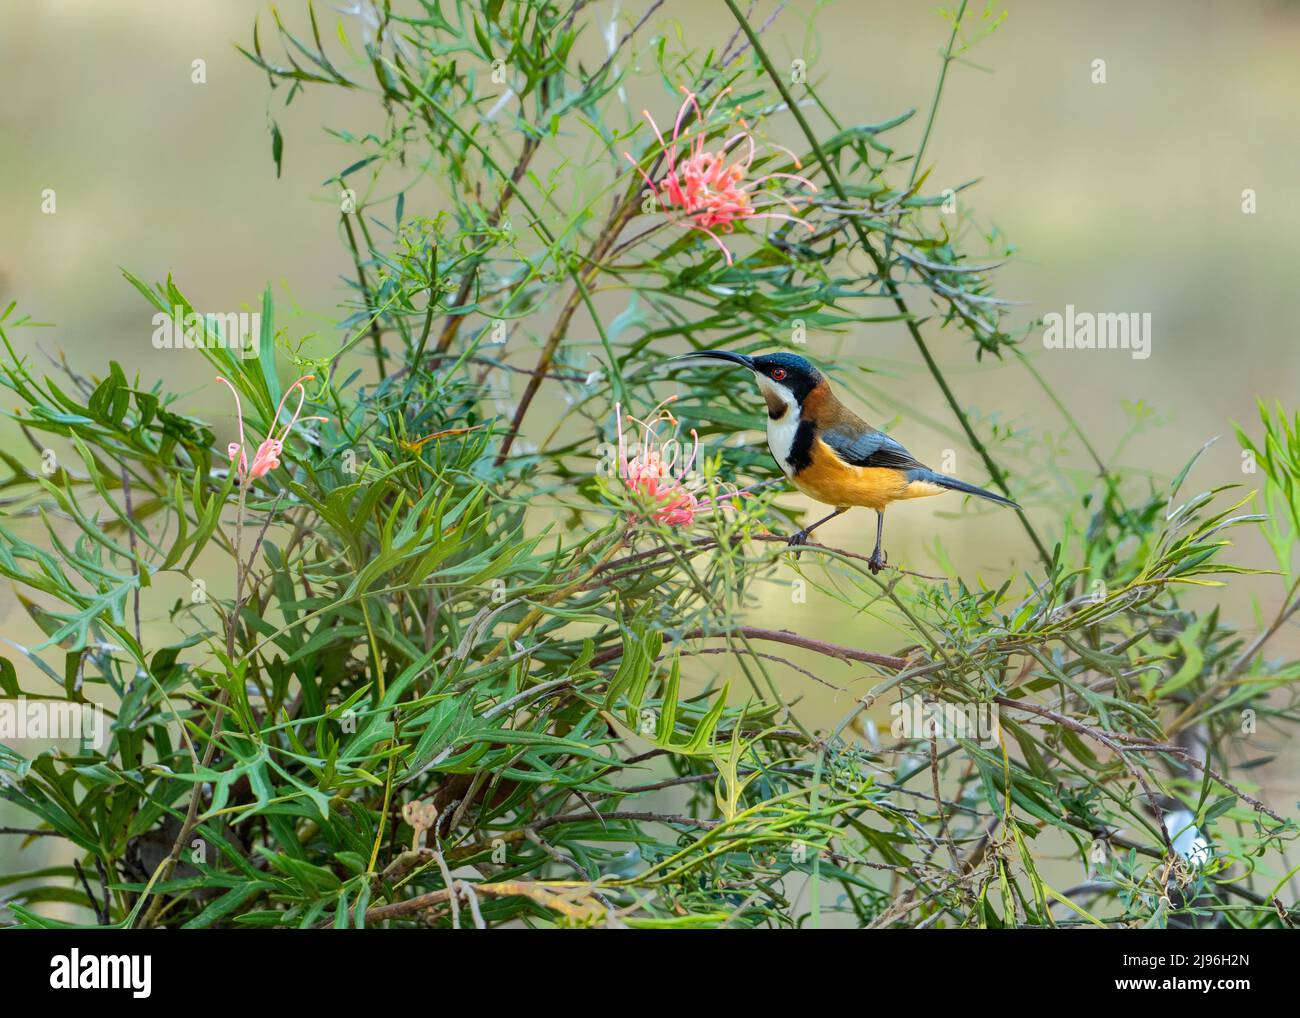 Colourful Australian Eastern spinebill (Acanthorhynchus tenuirostris) honeyeater in a grevillea shrub with pink flowers, in Nillumbik Shire, Victoria Stock Photo